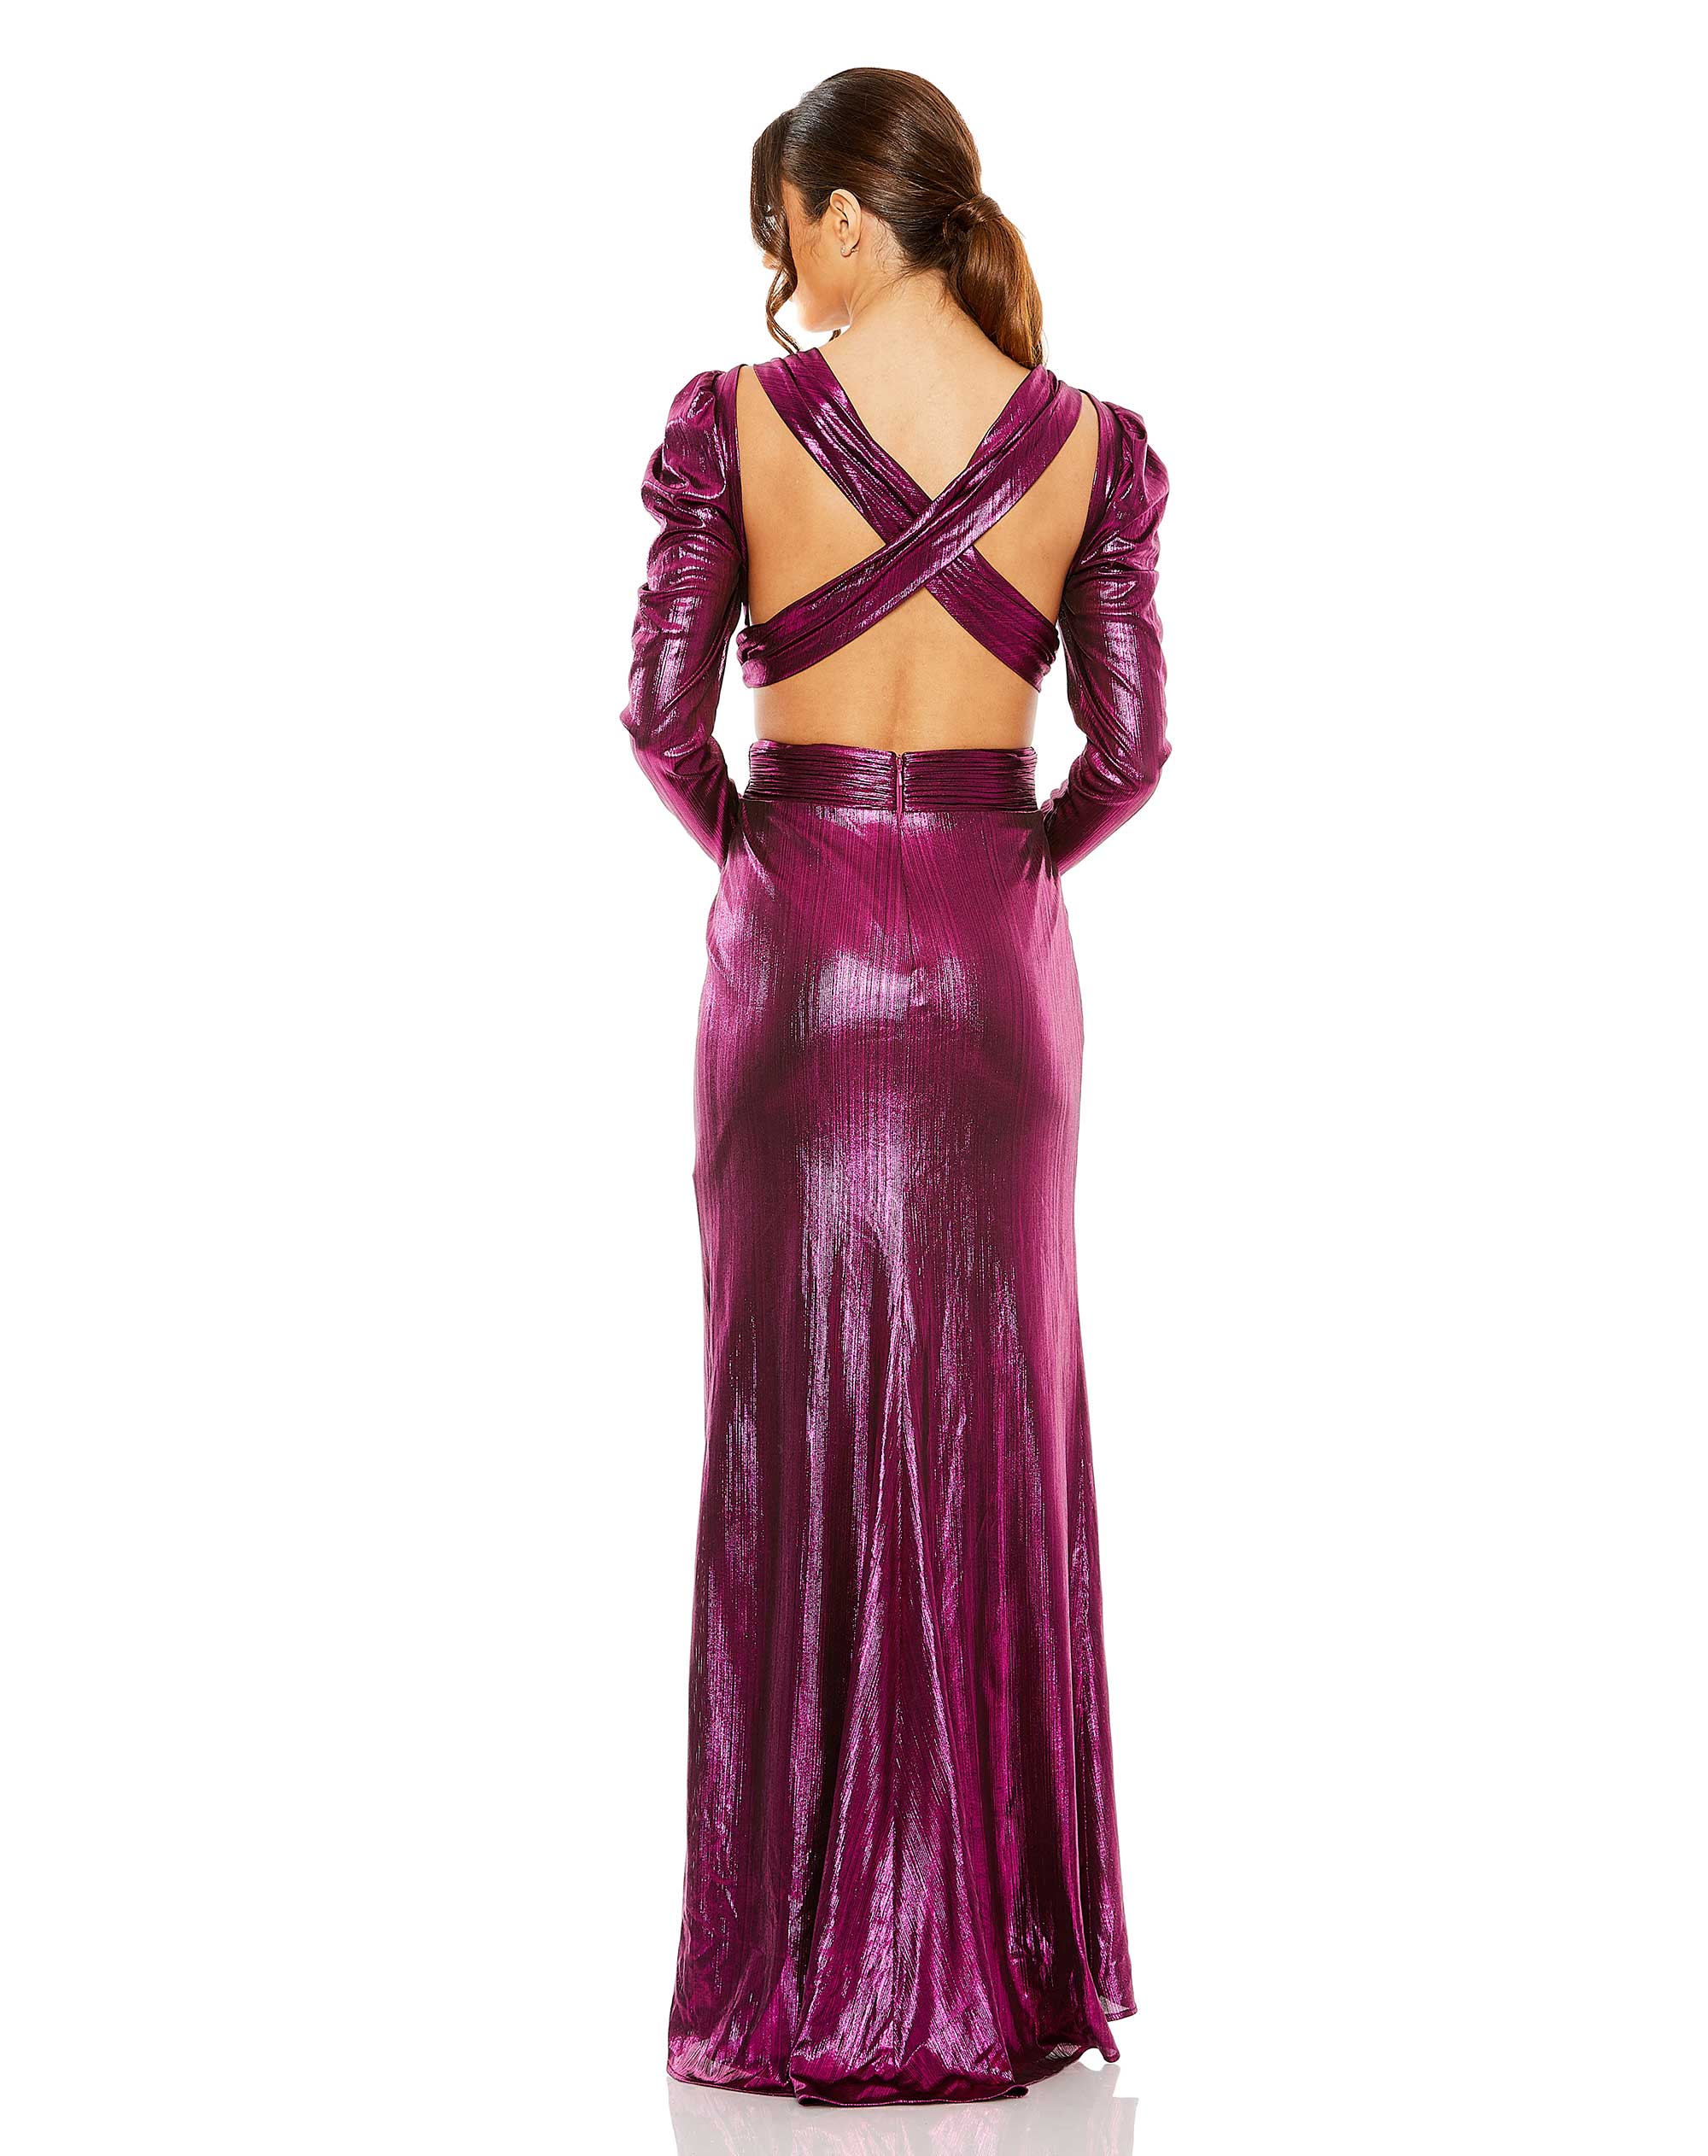 Princess Sleeve Cut Out Metallic Gown